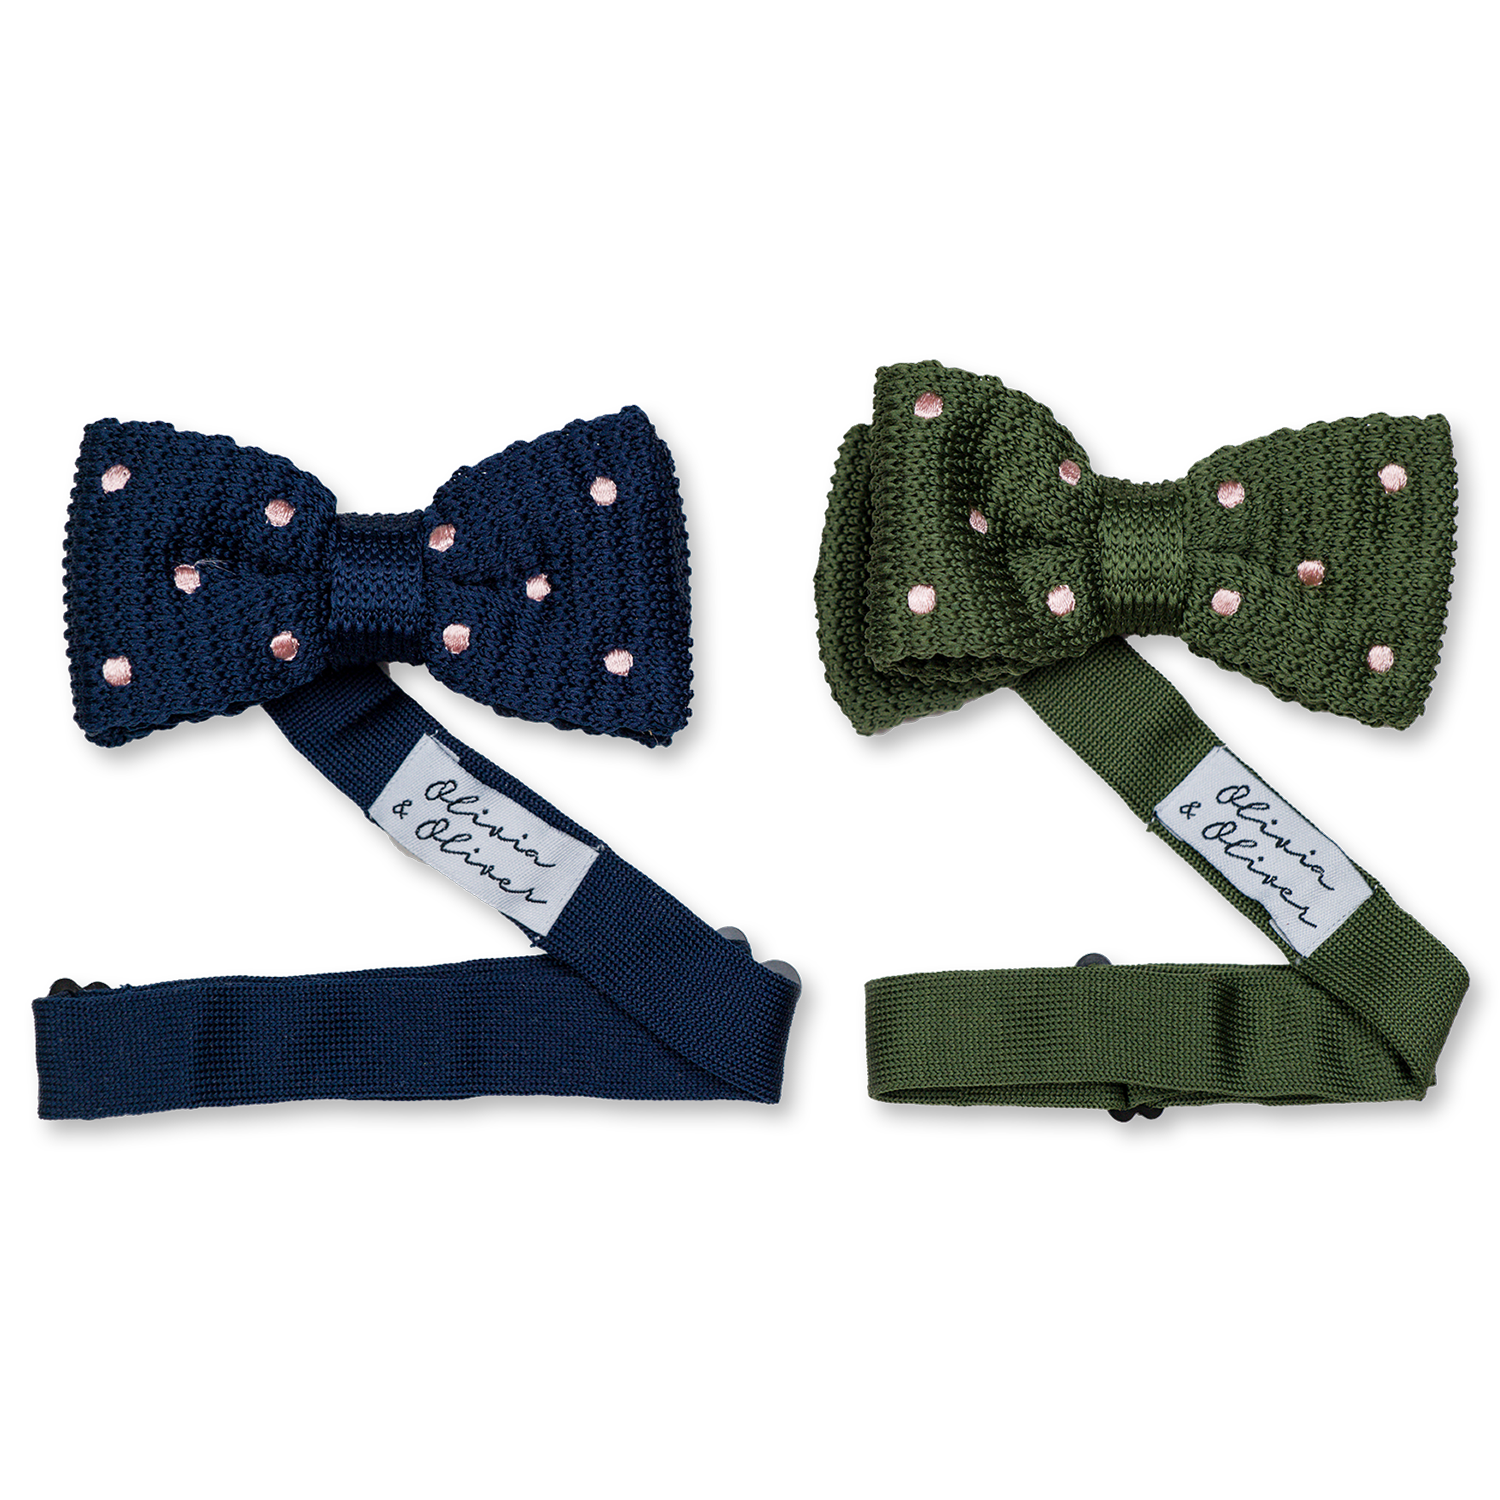 Pink suspenders with green bow tie